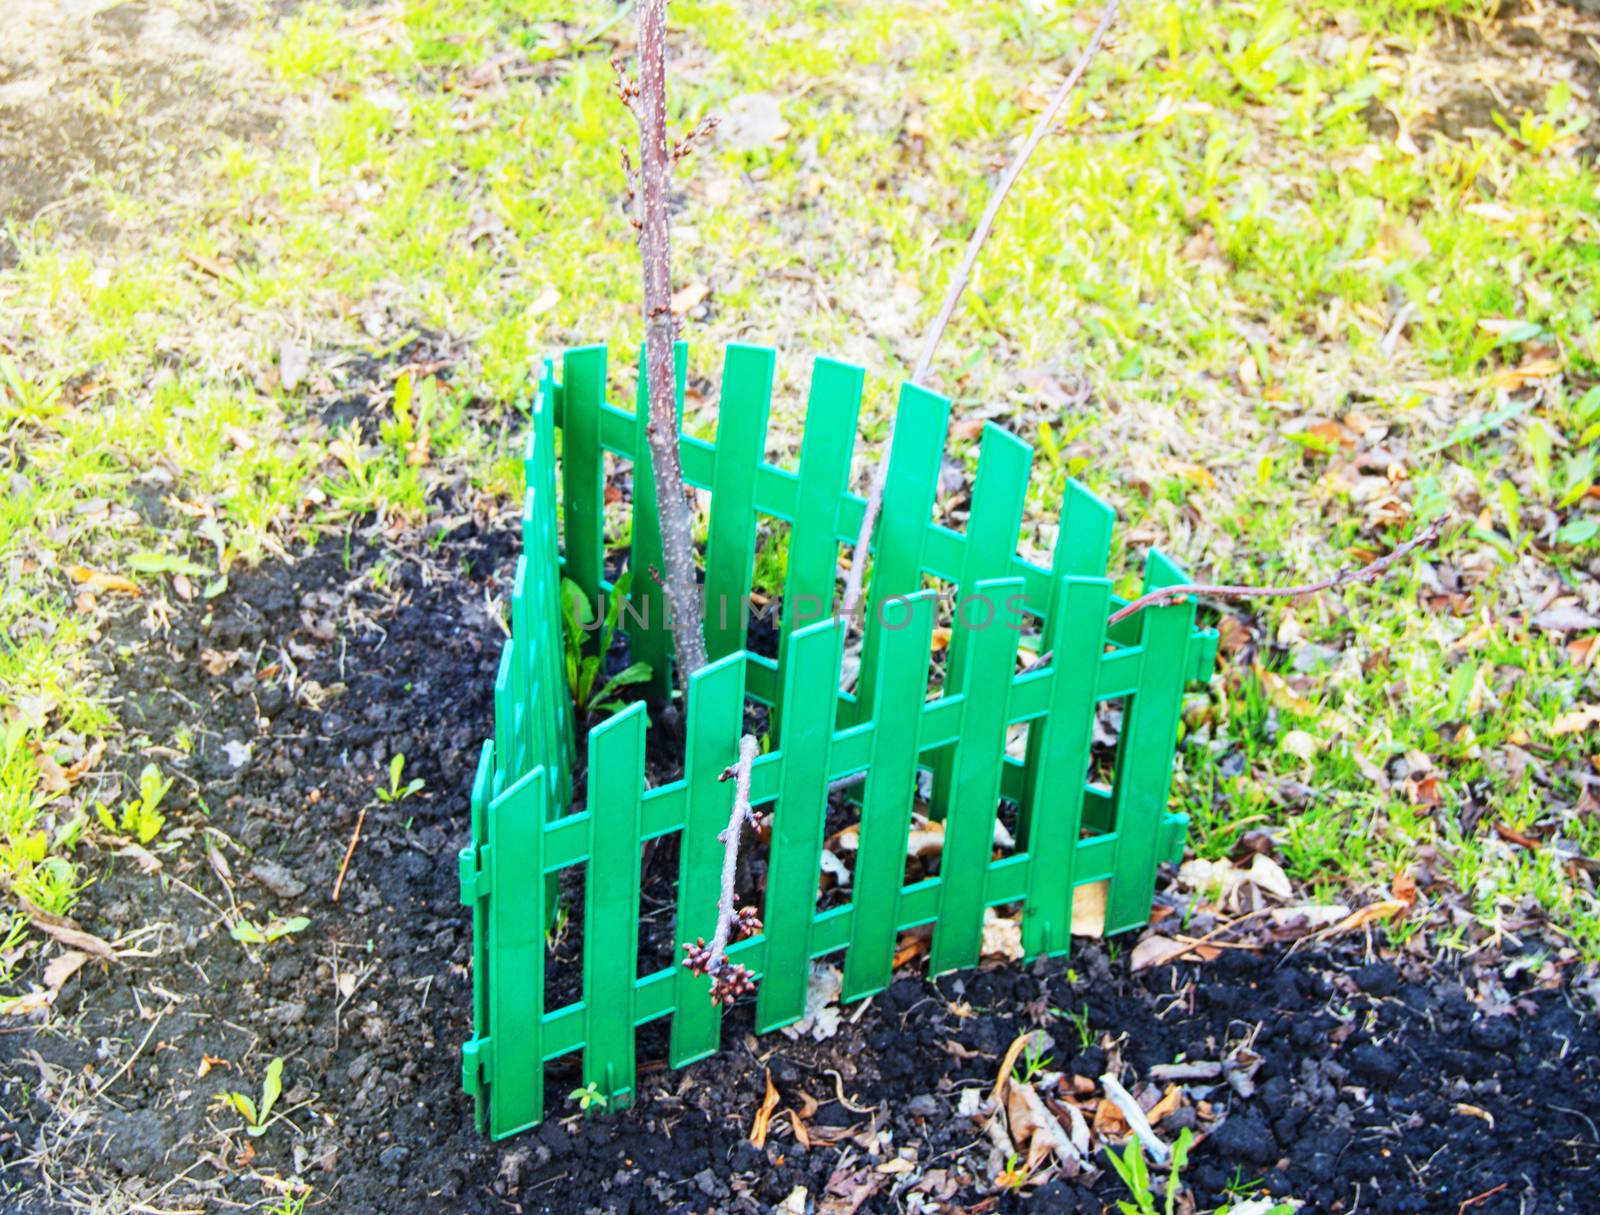 Green fence encloses and protects a young tree, sapling.